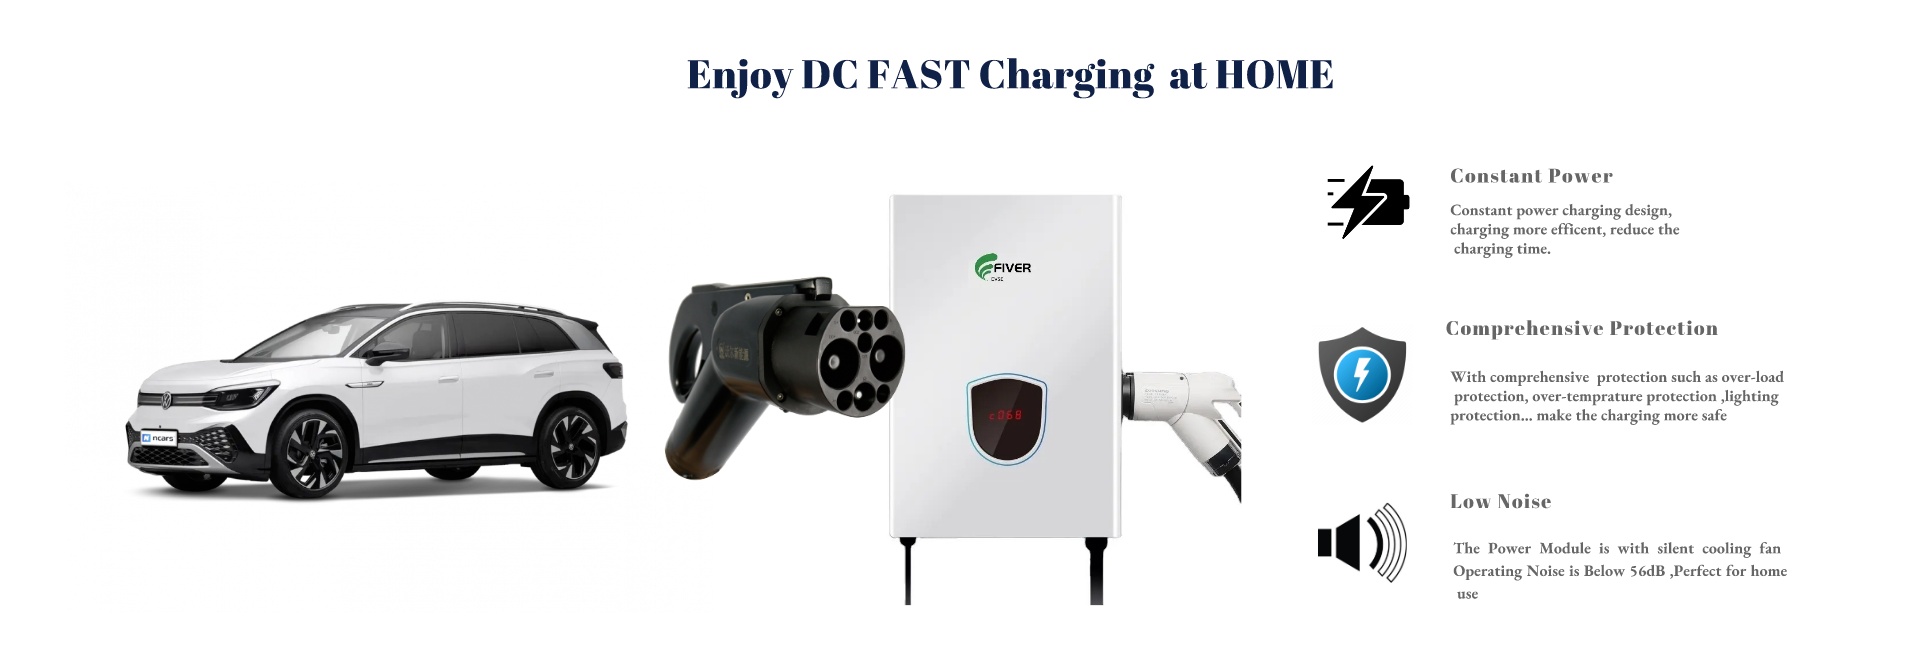 Home DC Fast Charger